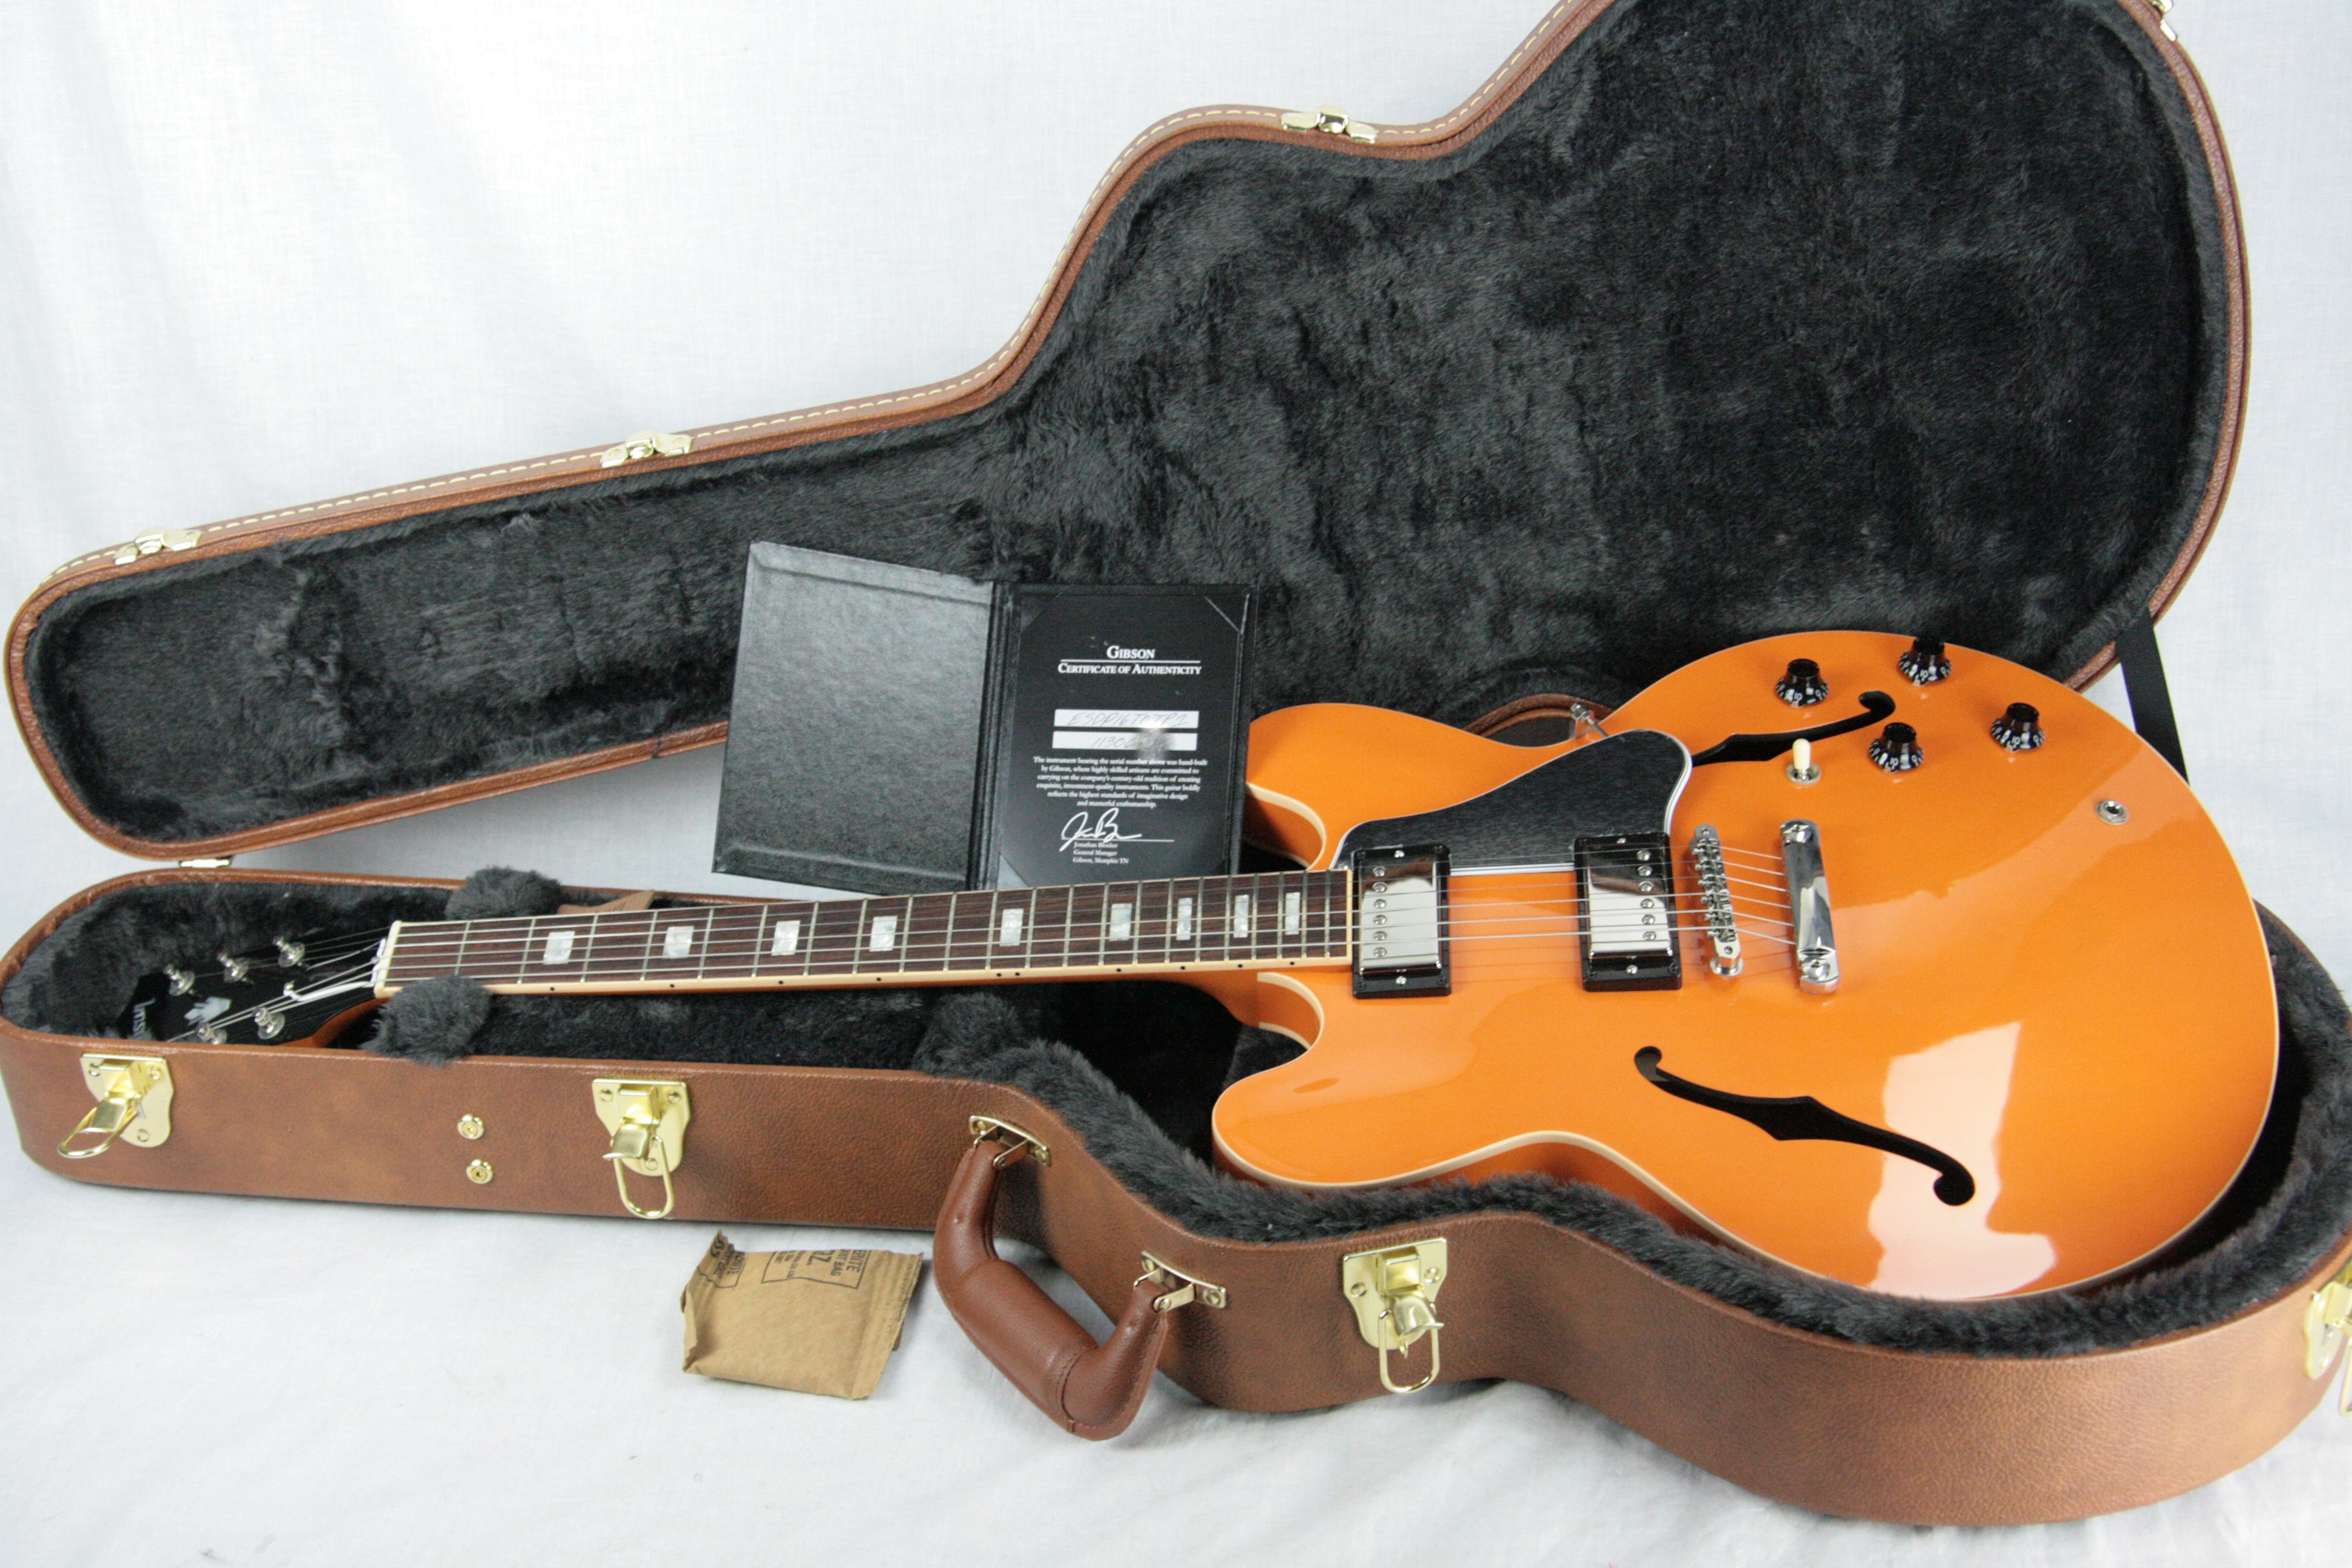 *SOLD*  2016 Gibson Memphis ES-335 TASCAM ORANGE! Limited Edition Model w/ Block Inlays! 345 355